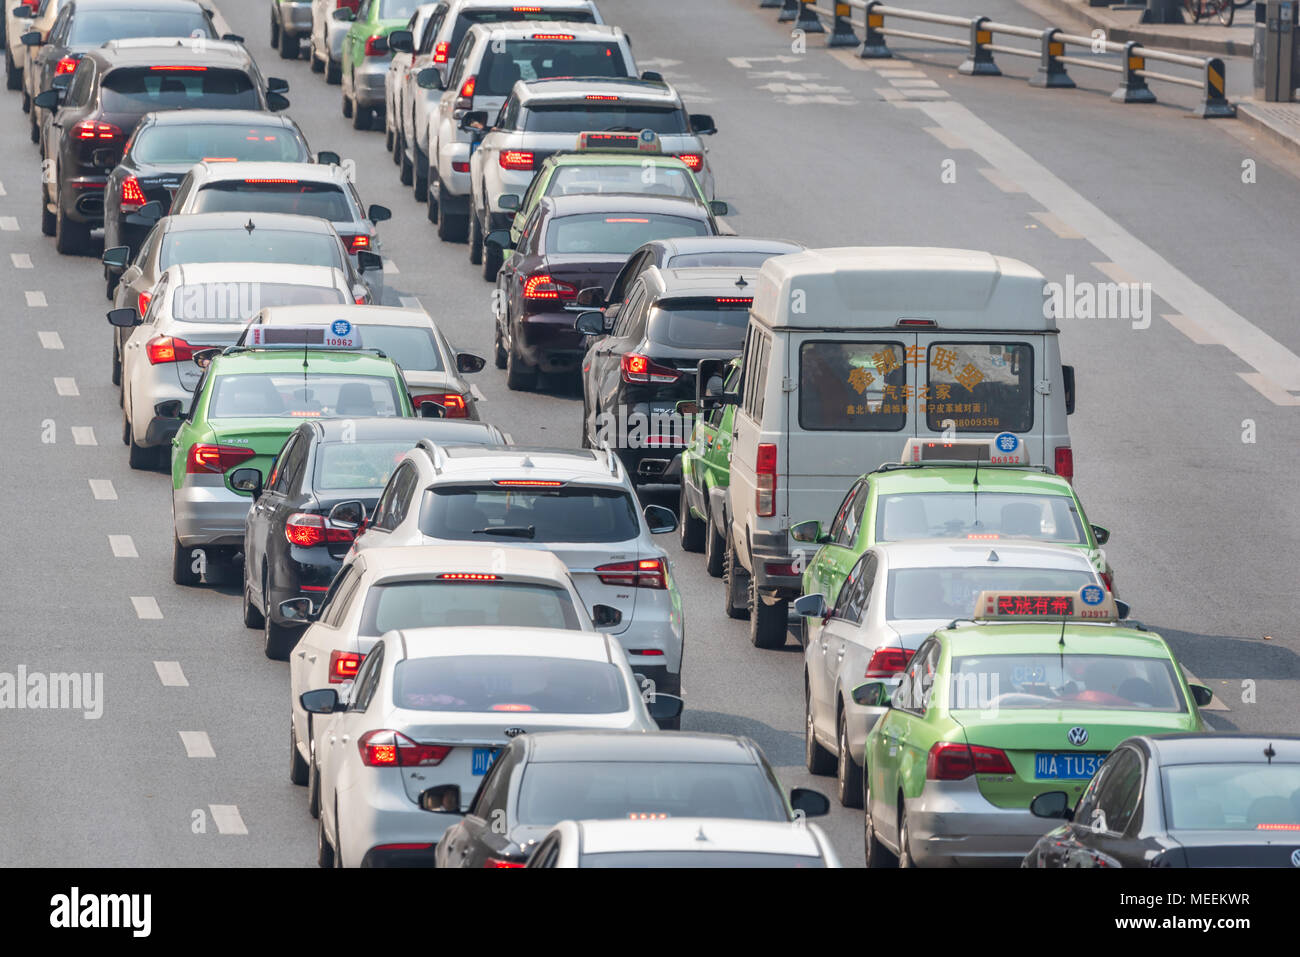 Chengdu, Sichuan Province, China - April 18, 2018 : Two lanes of car traffic in a large avenue Stock Photo